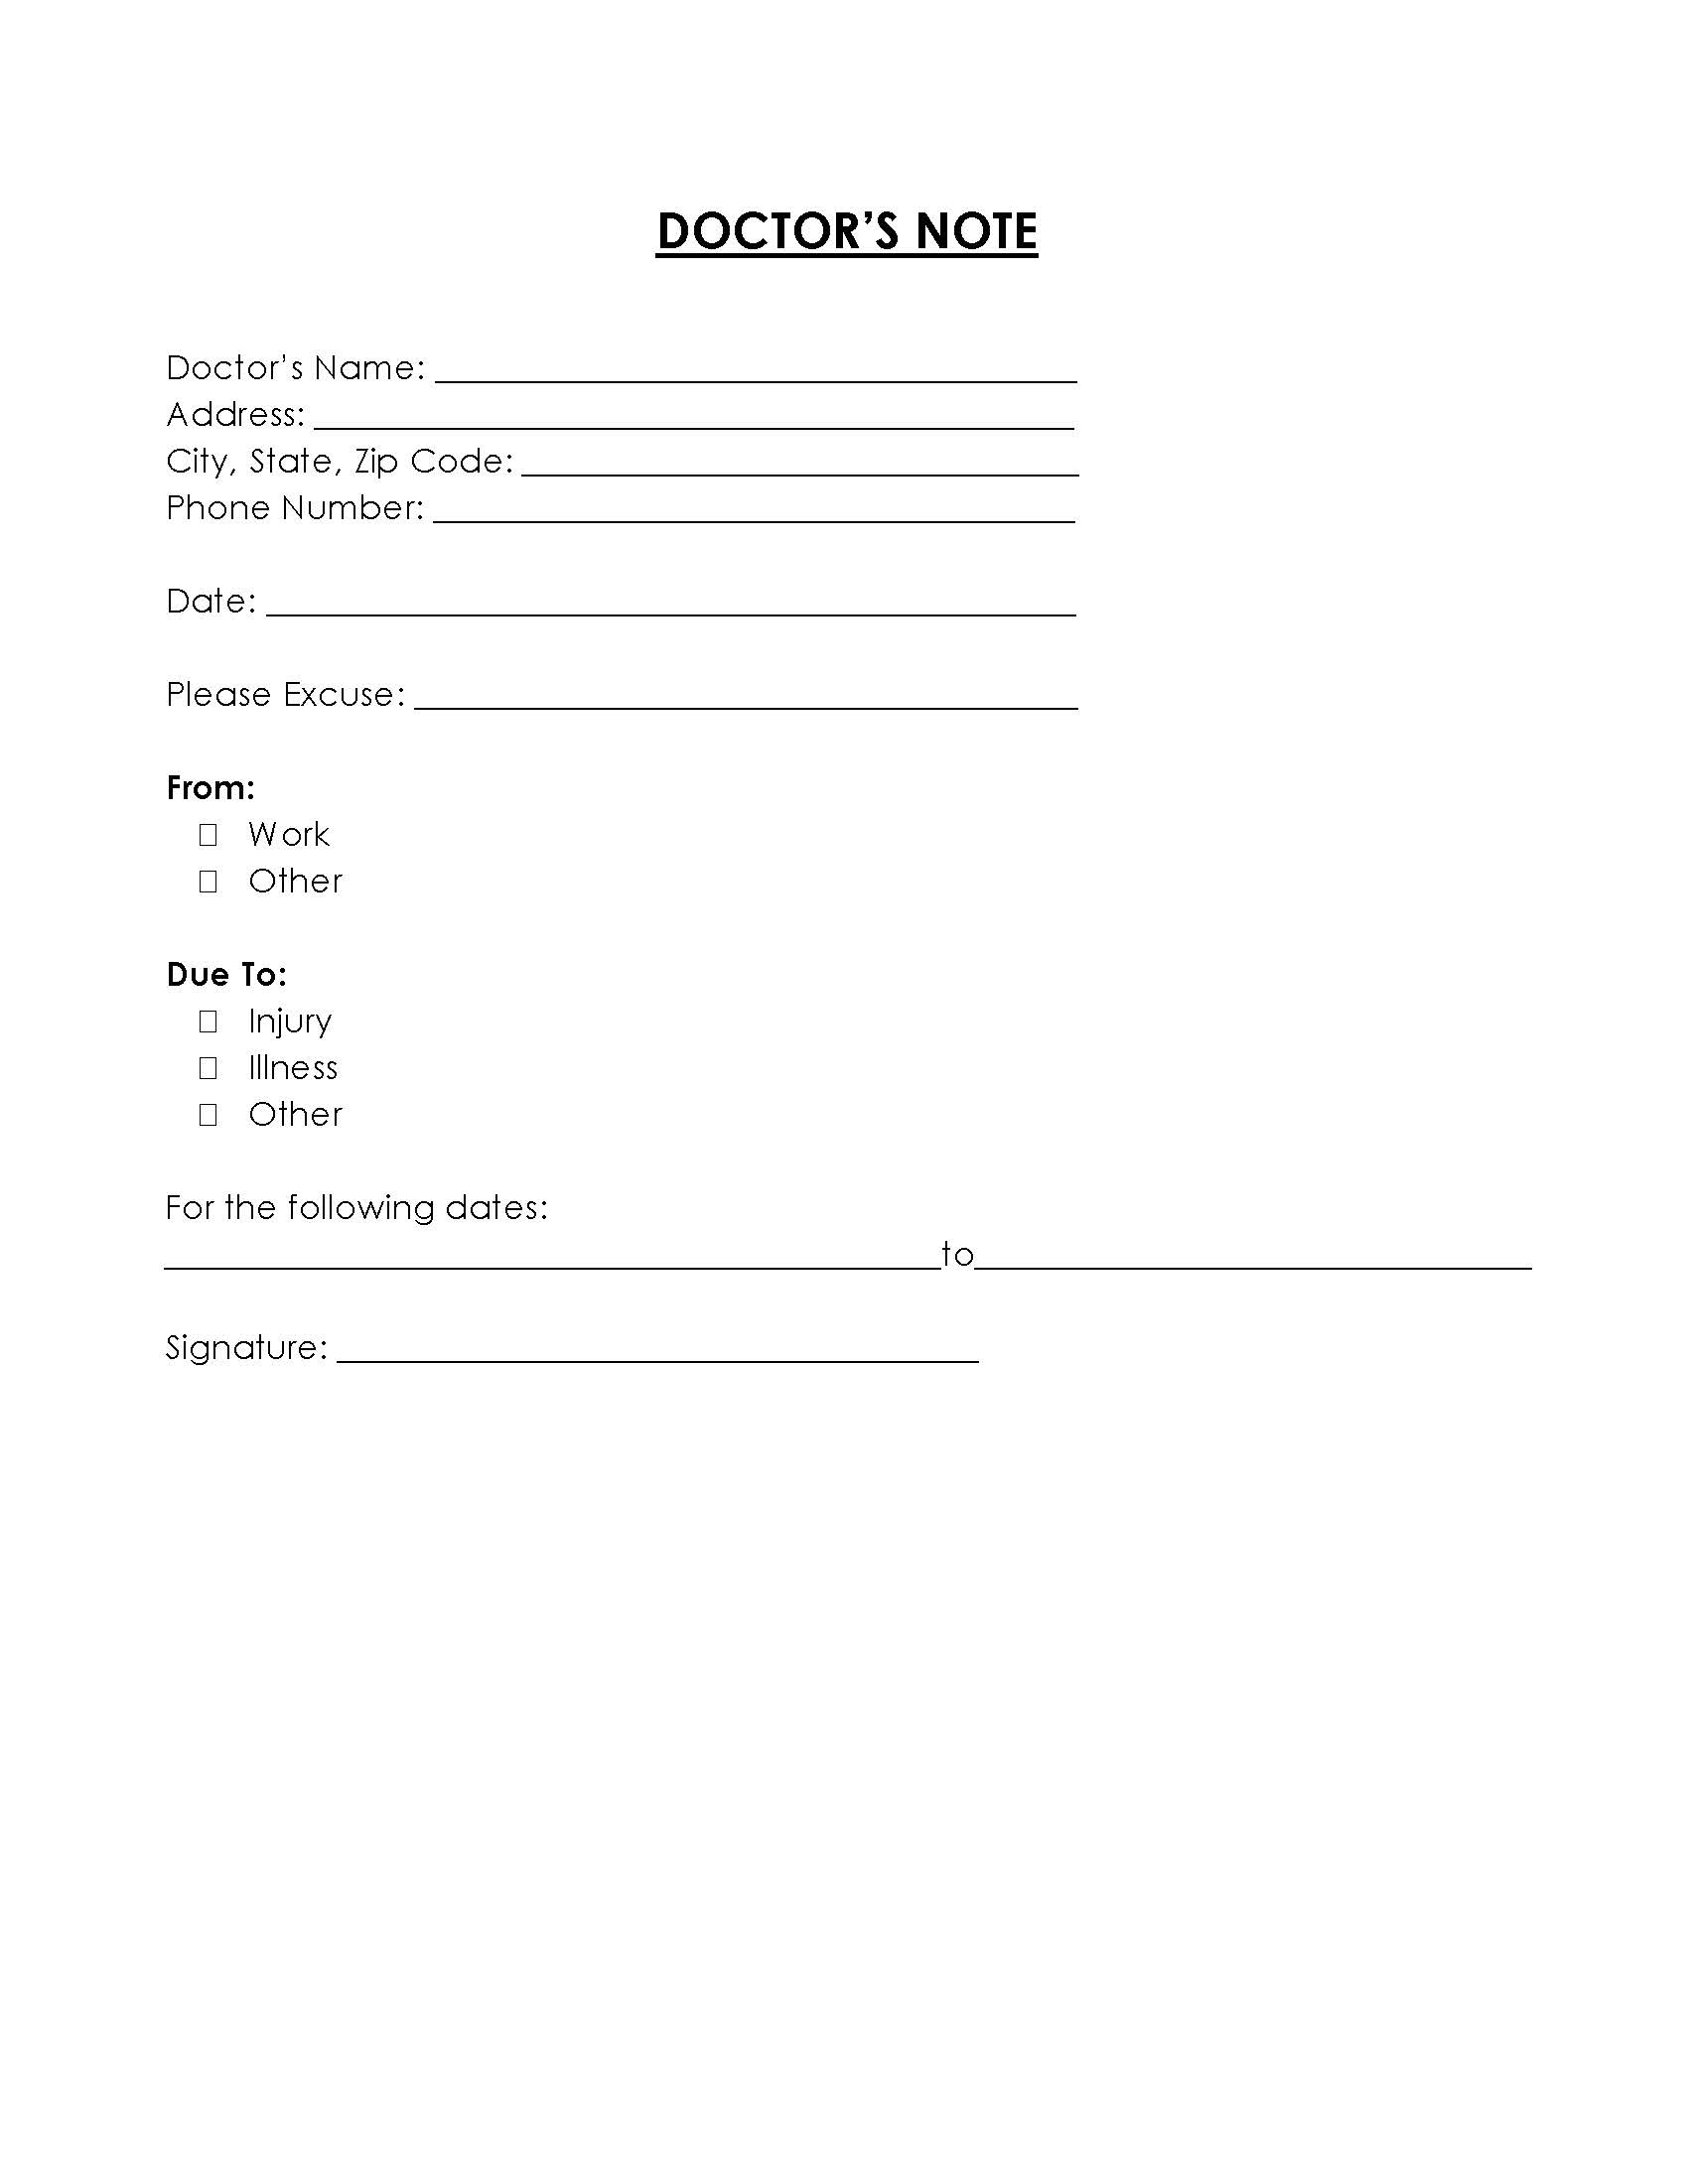 Free Doctor Note Template - Word Document Format